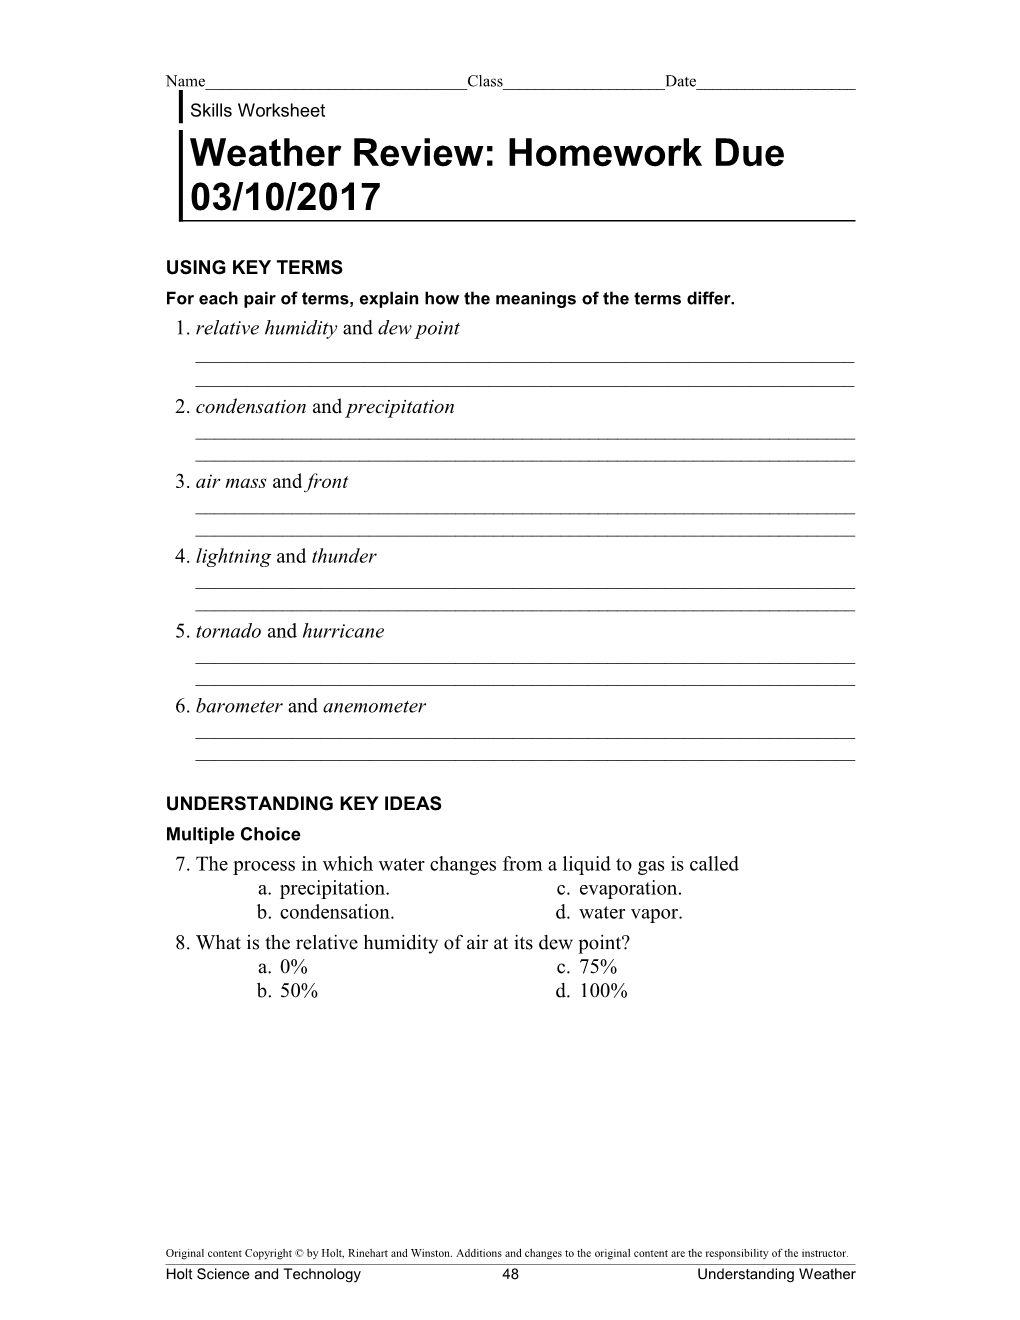 Weather Review: Homework Due 03/10/2017